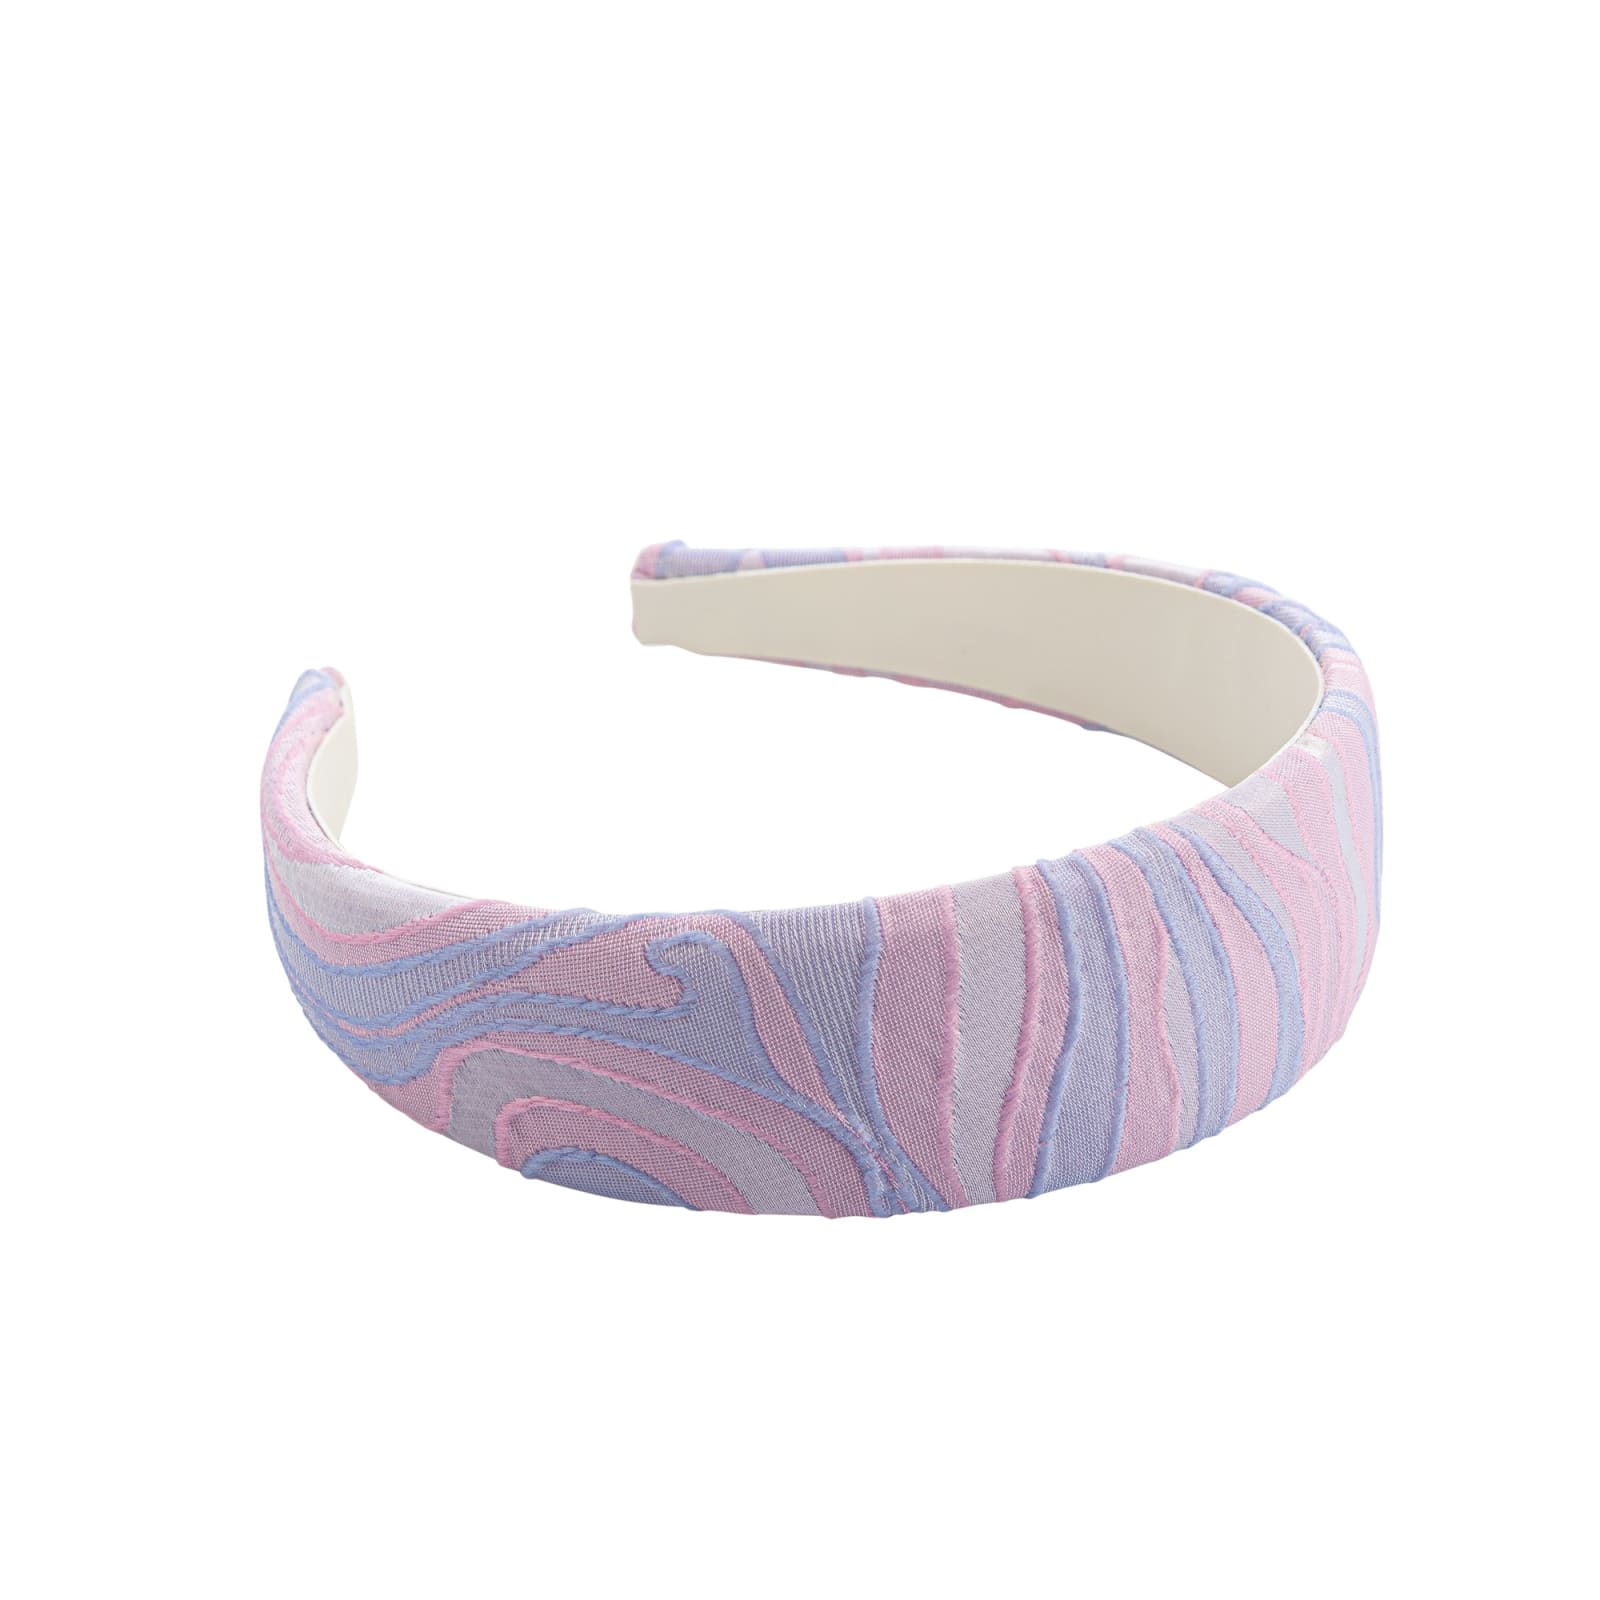 Emilio Pucci Patterned Hair Band